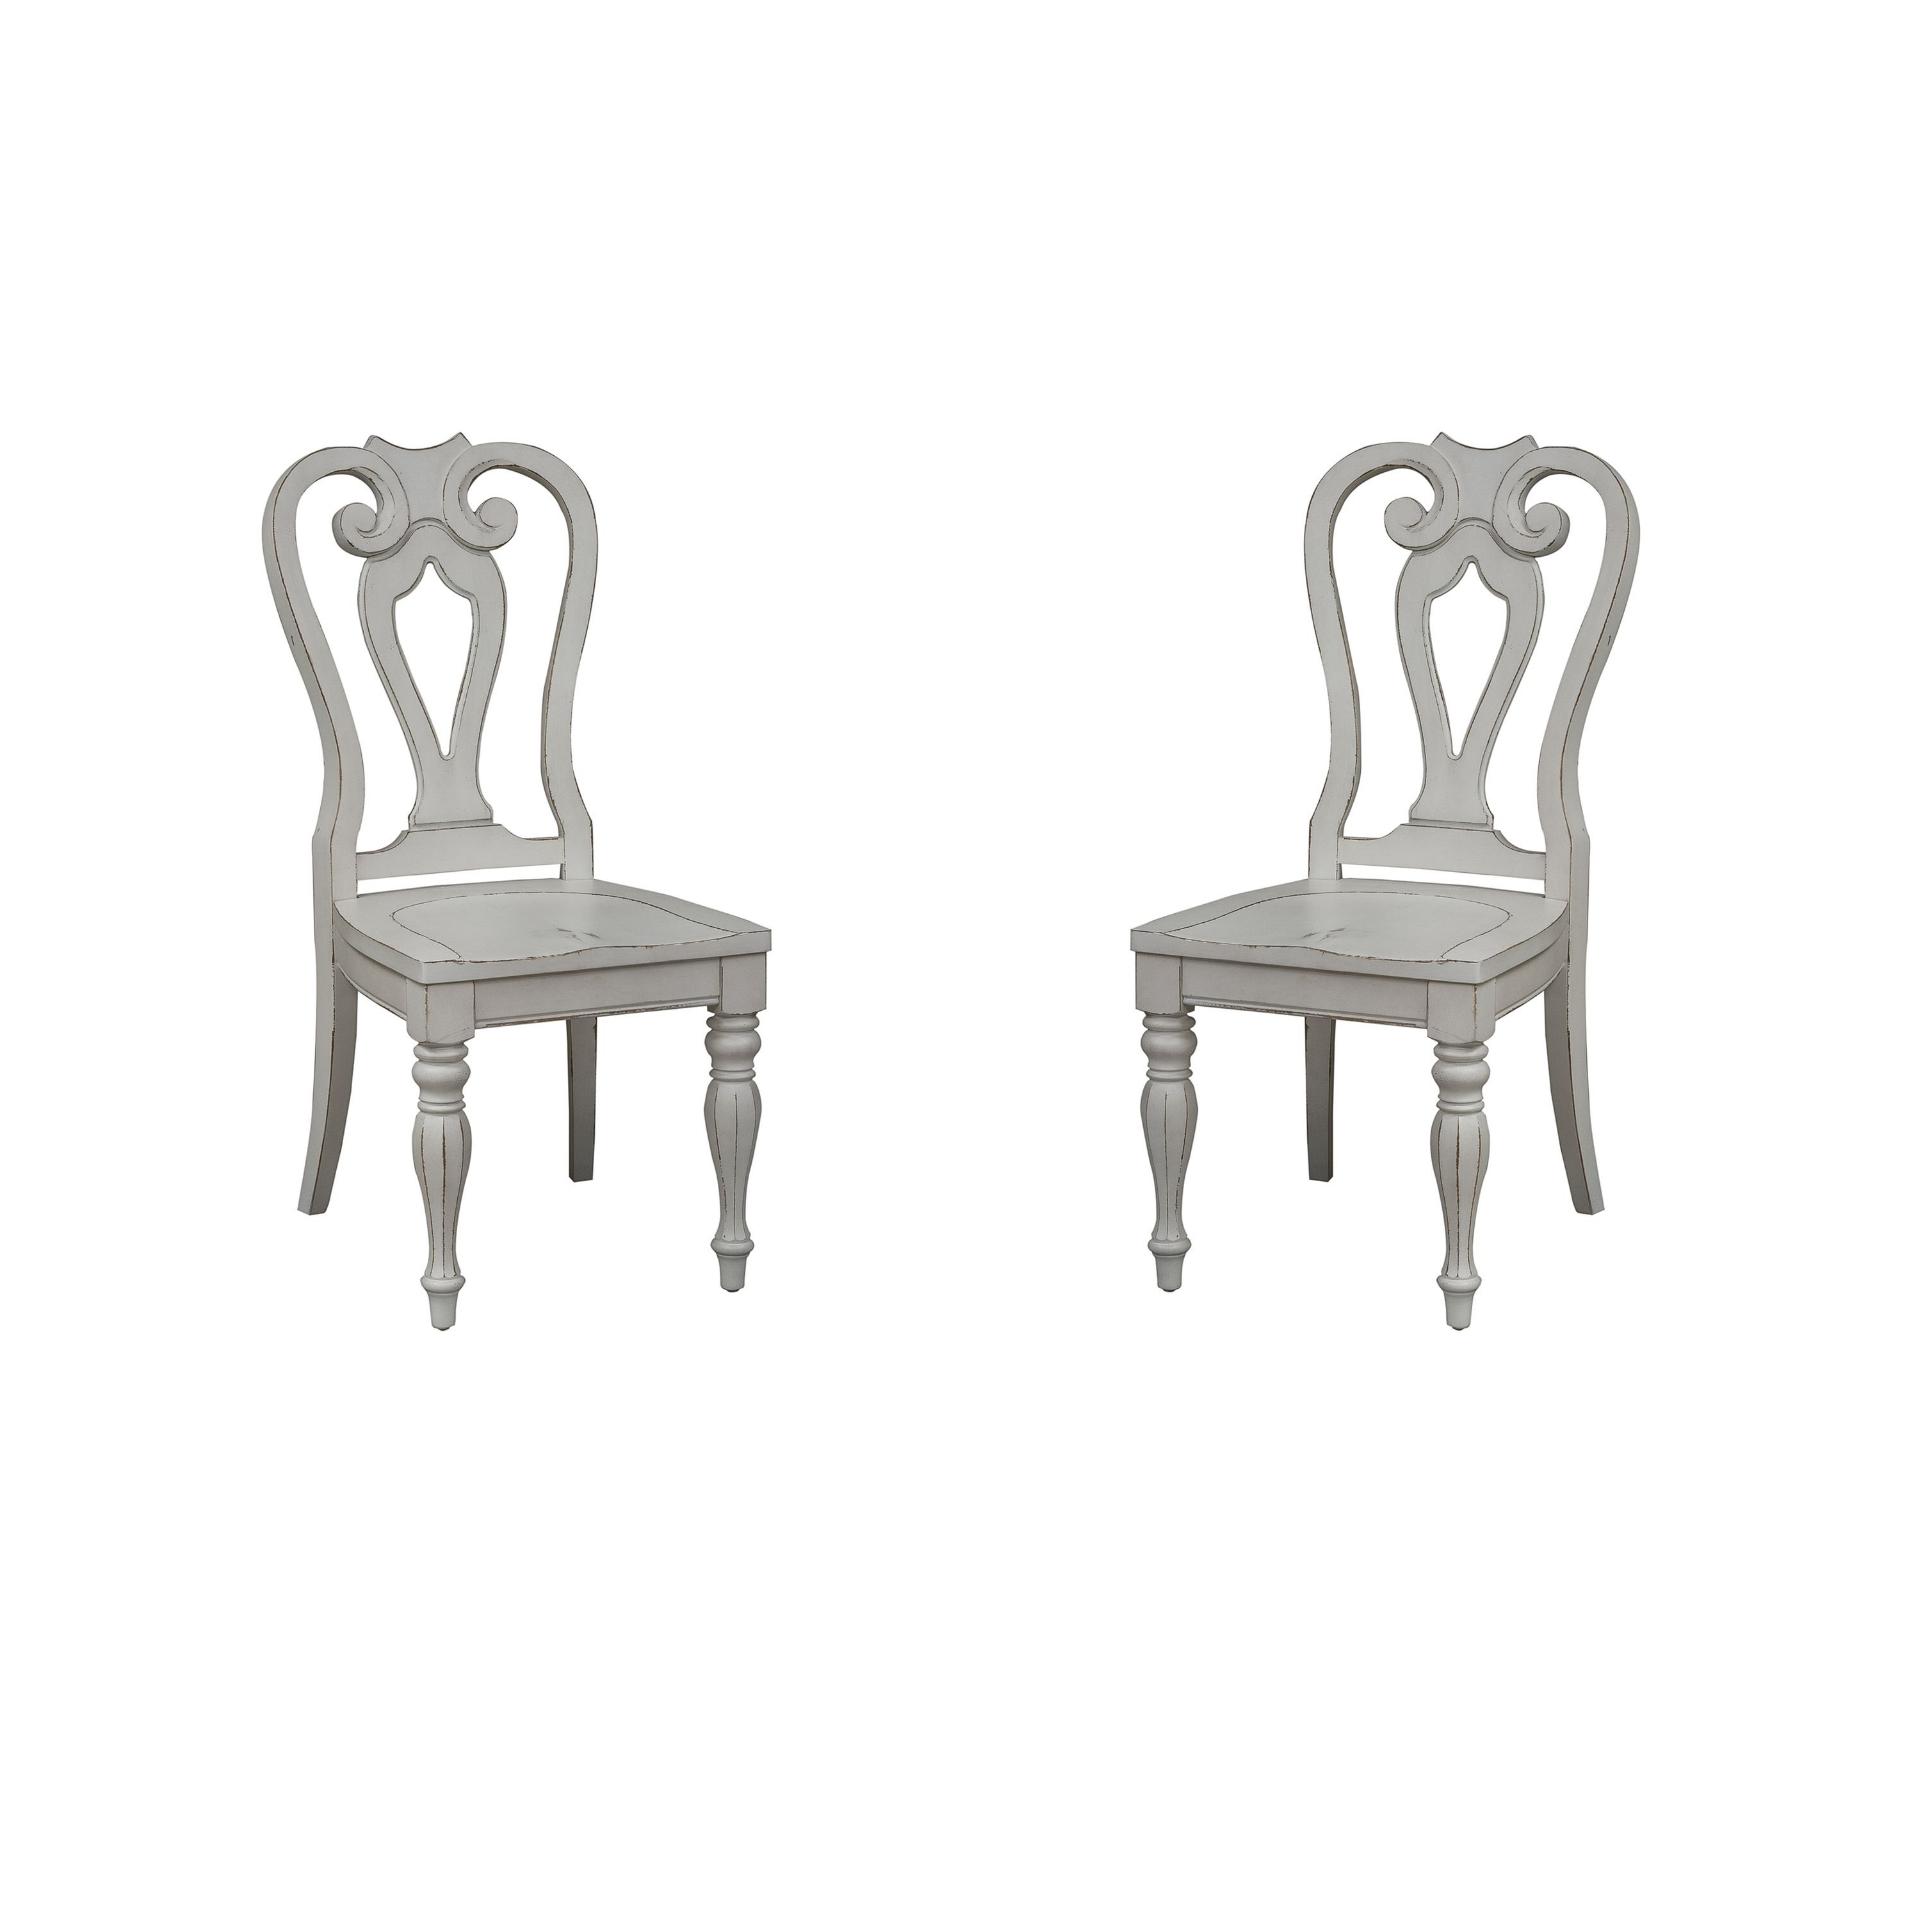 European Traditional Dining Chair Set 244-C2500S-Set 244-C2500S-Set-2 in White 